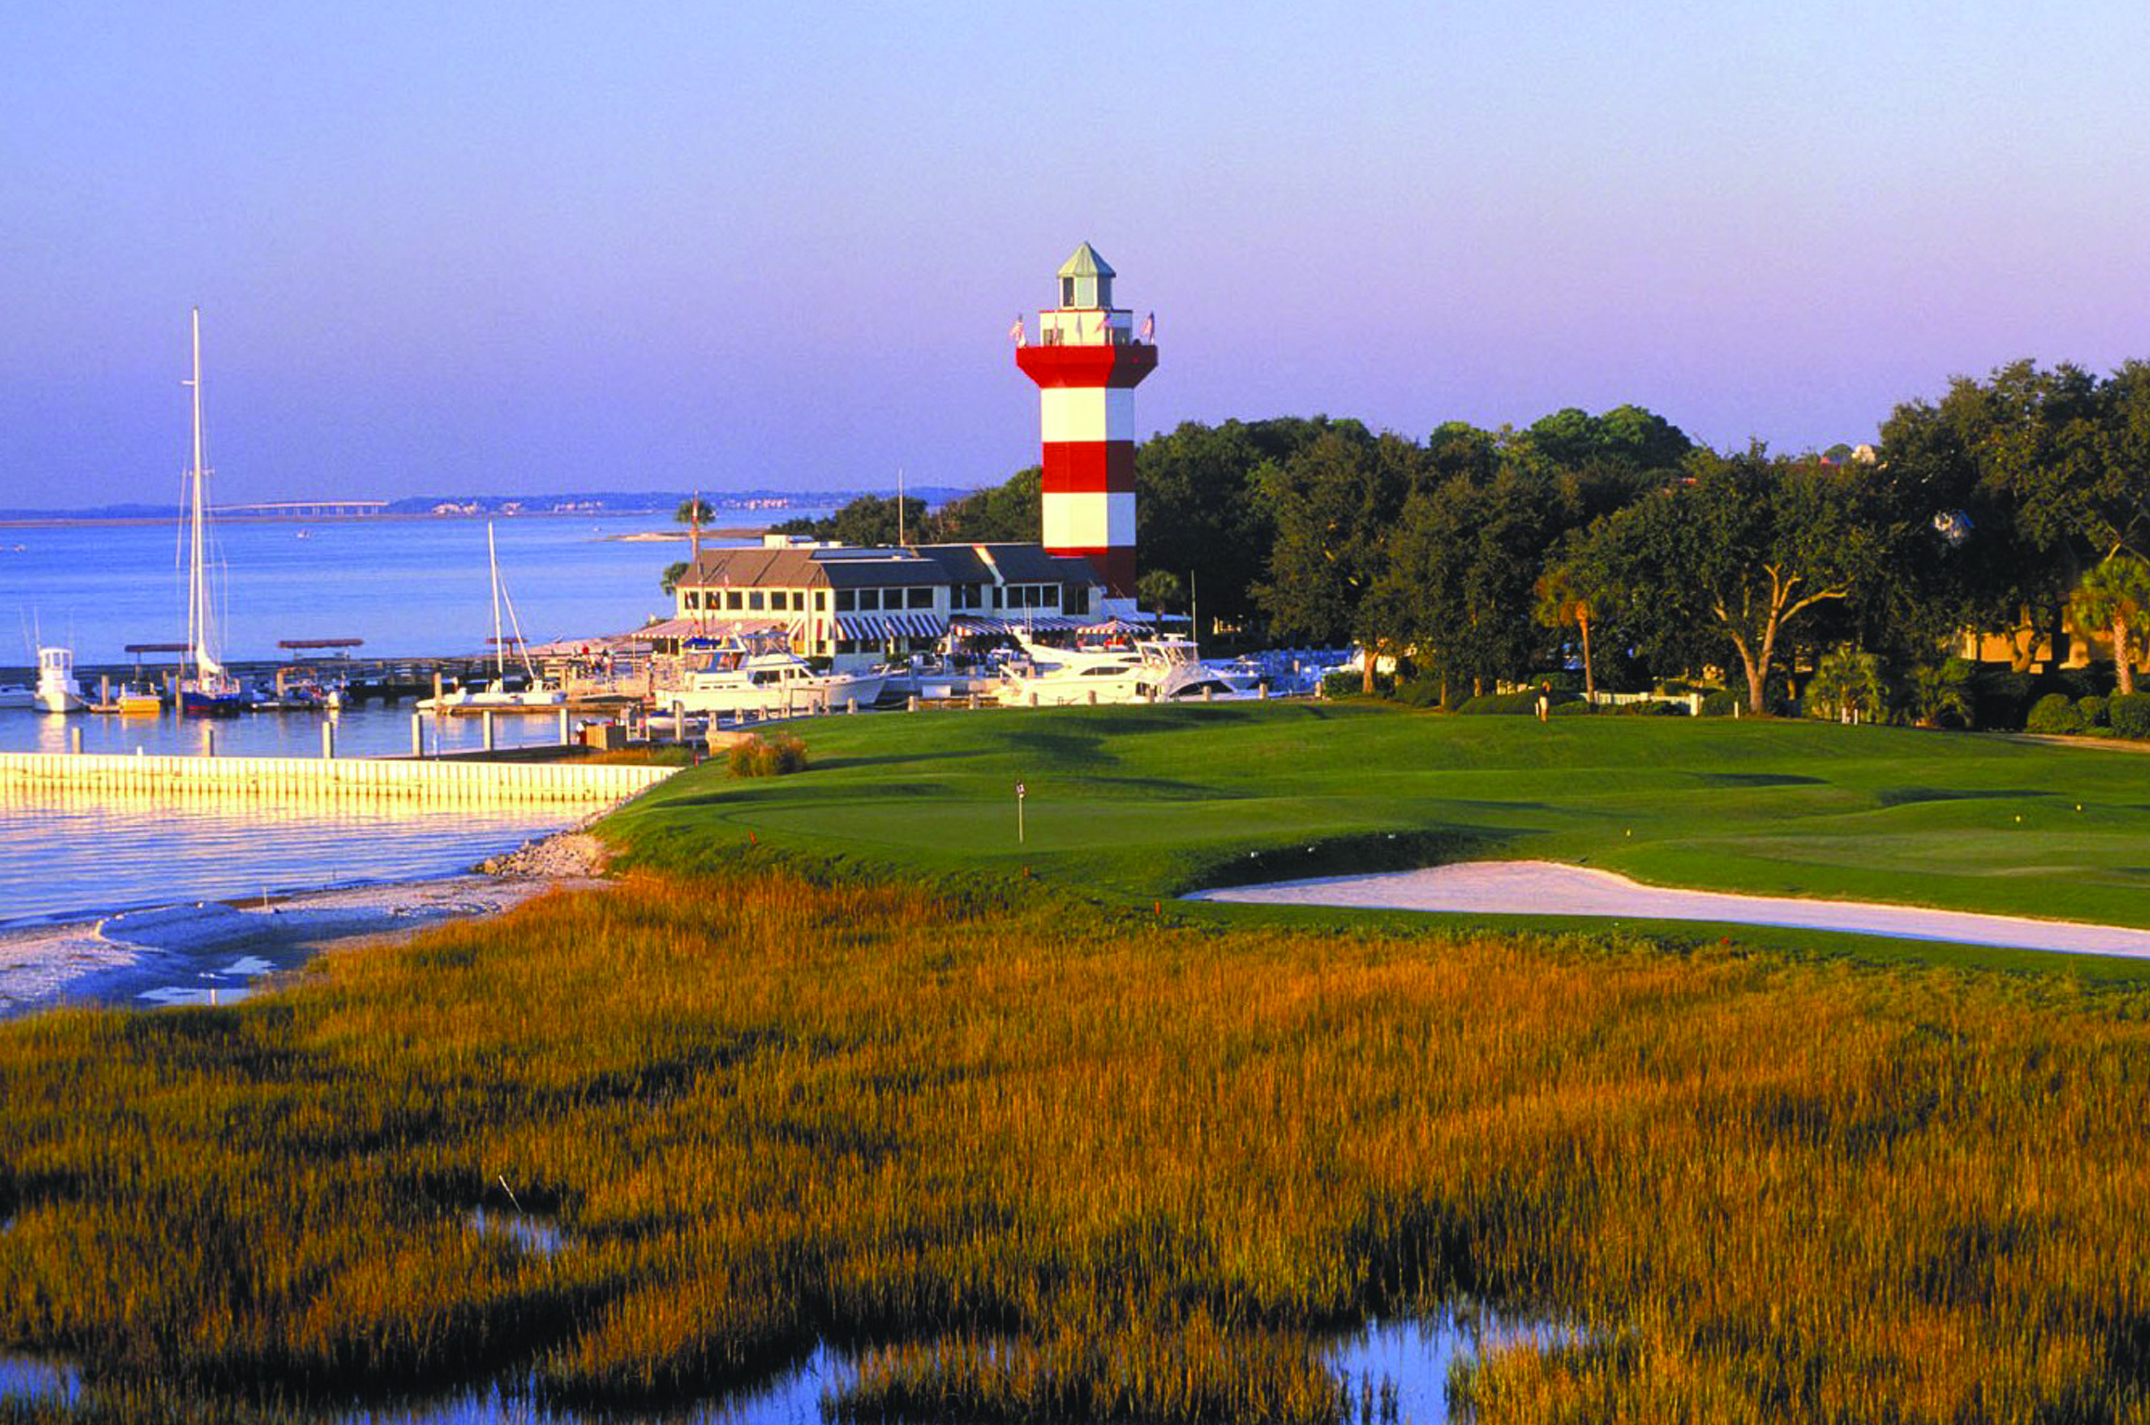 Hilton Head Island -- Forget About The Golf, Let's Just Relax